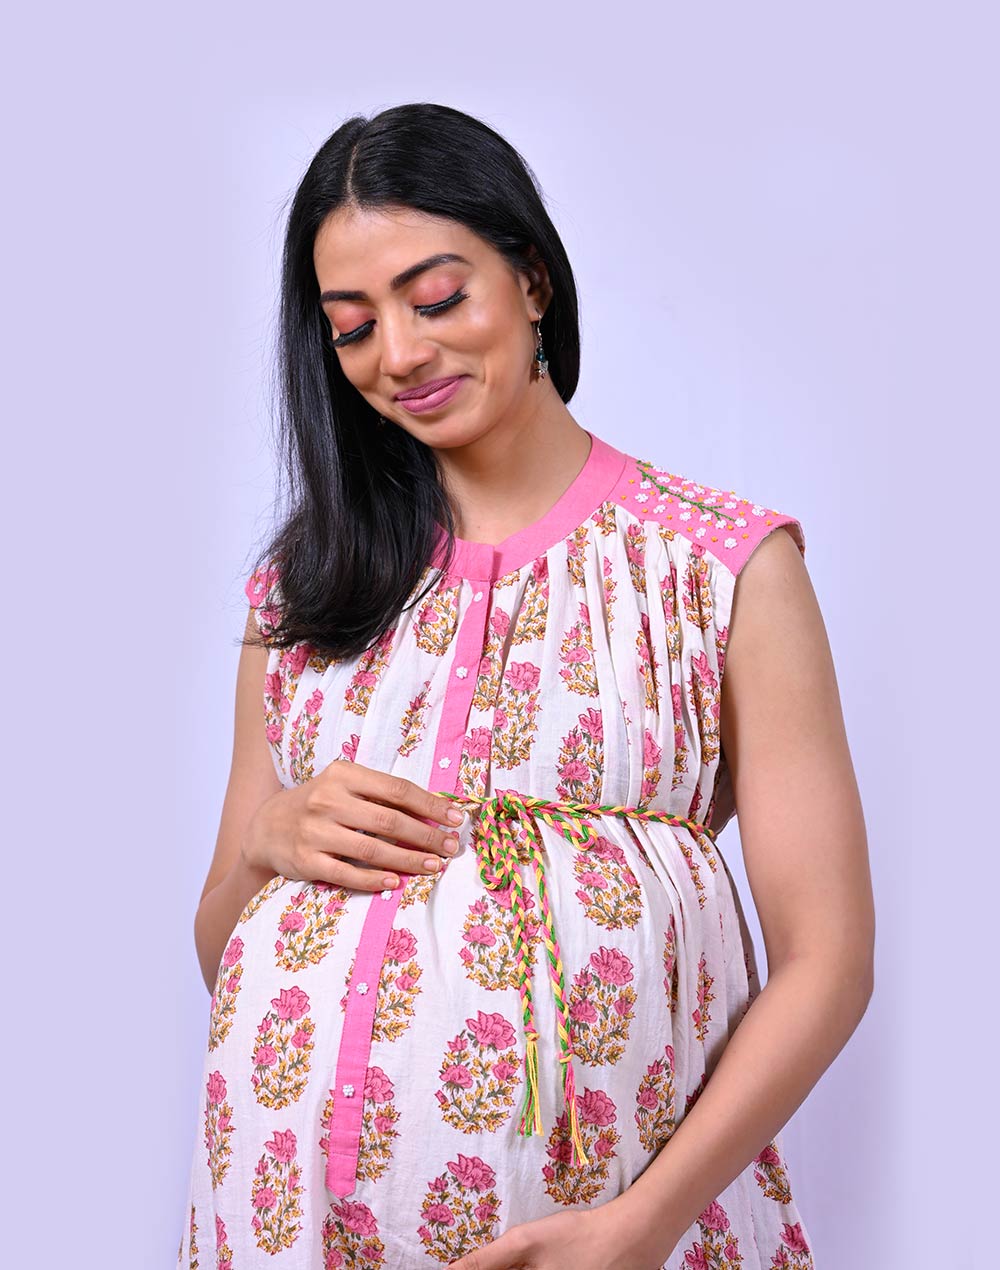 Skater Dress Archives - Affordable Maternity Wear Online India - Chic Momz